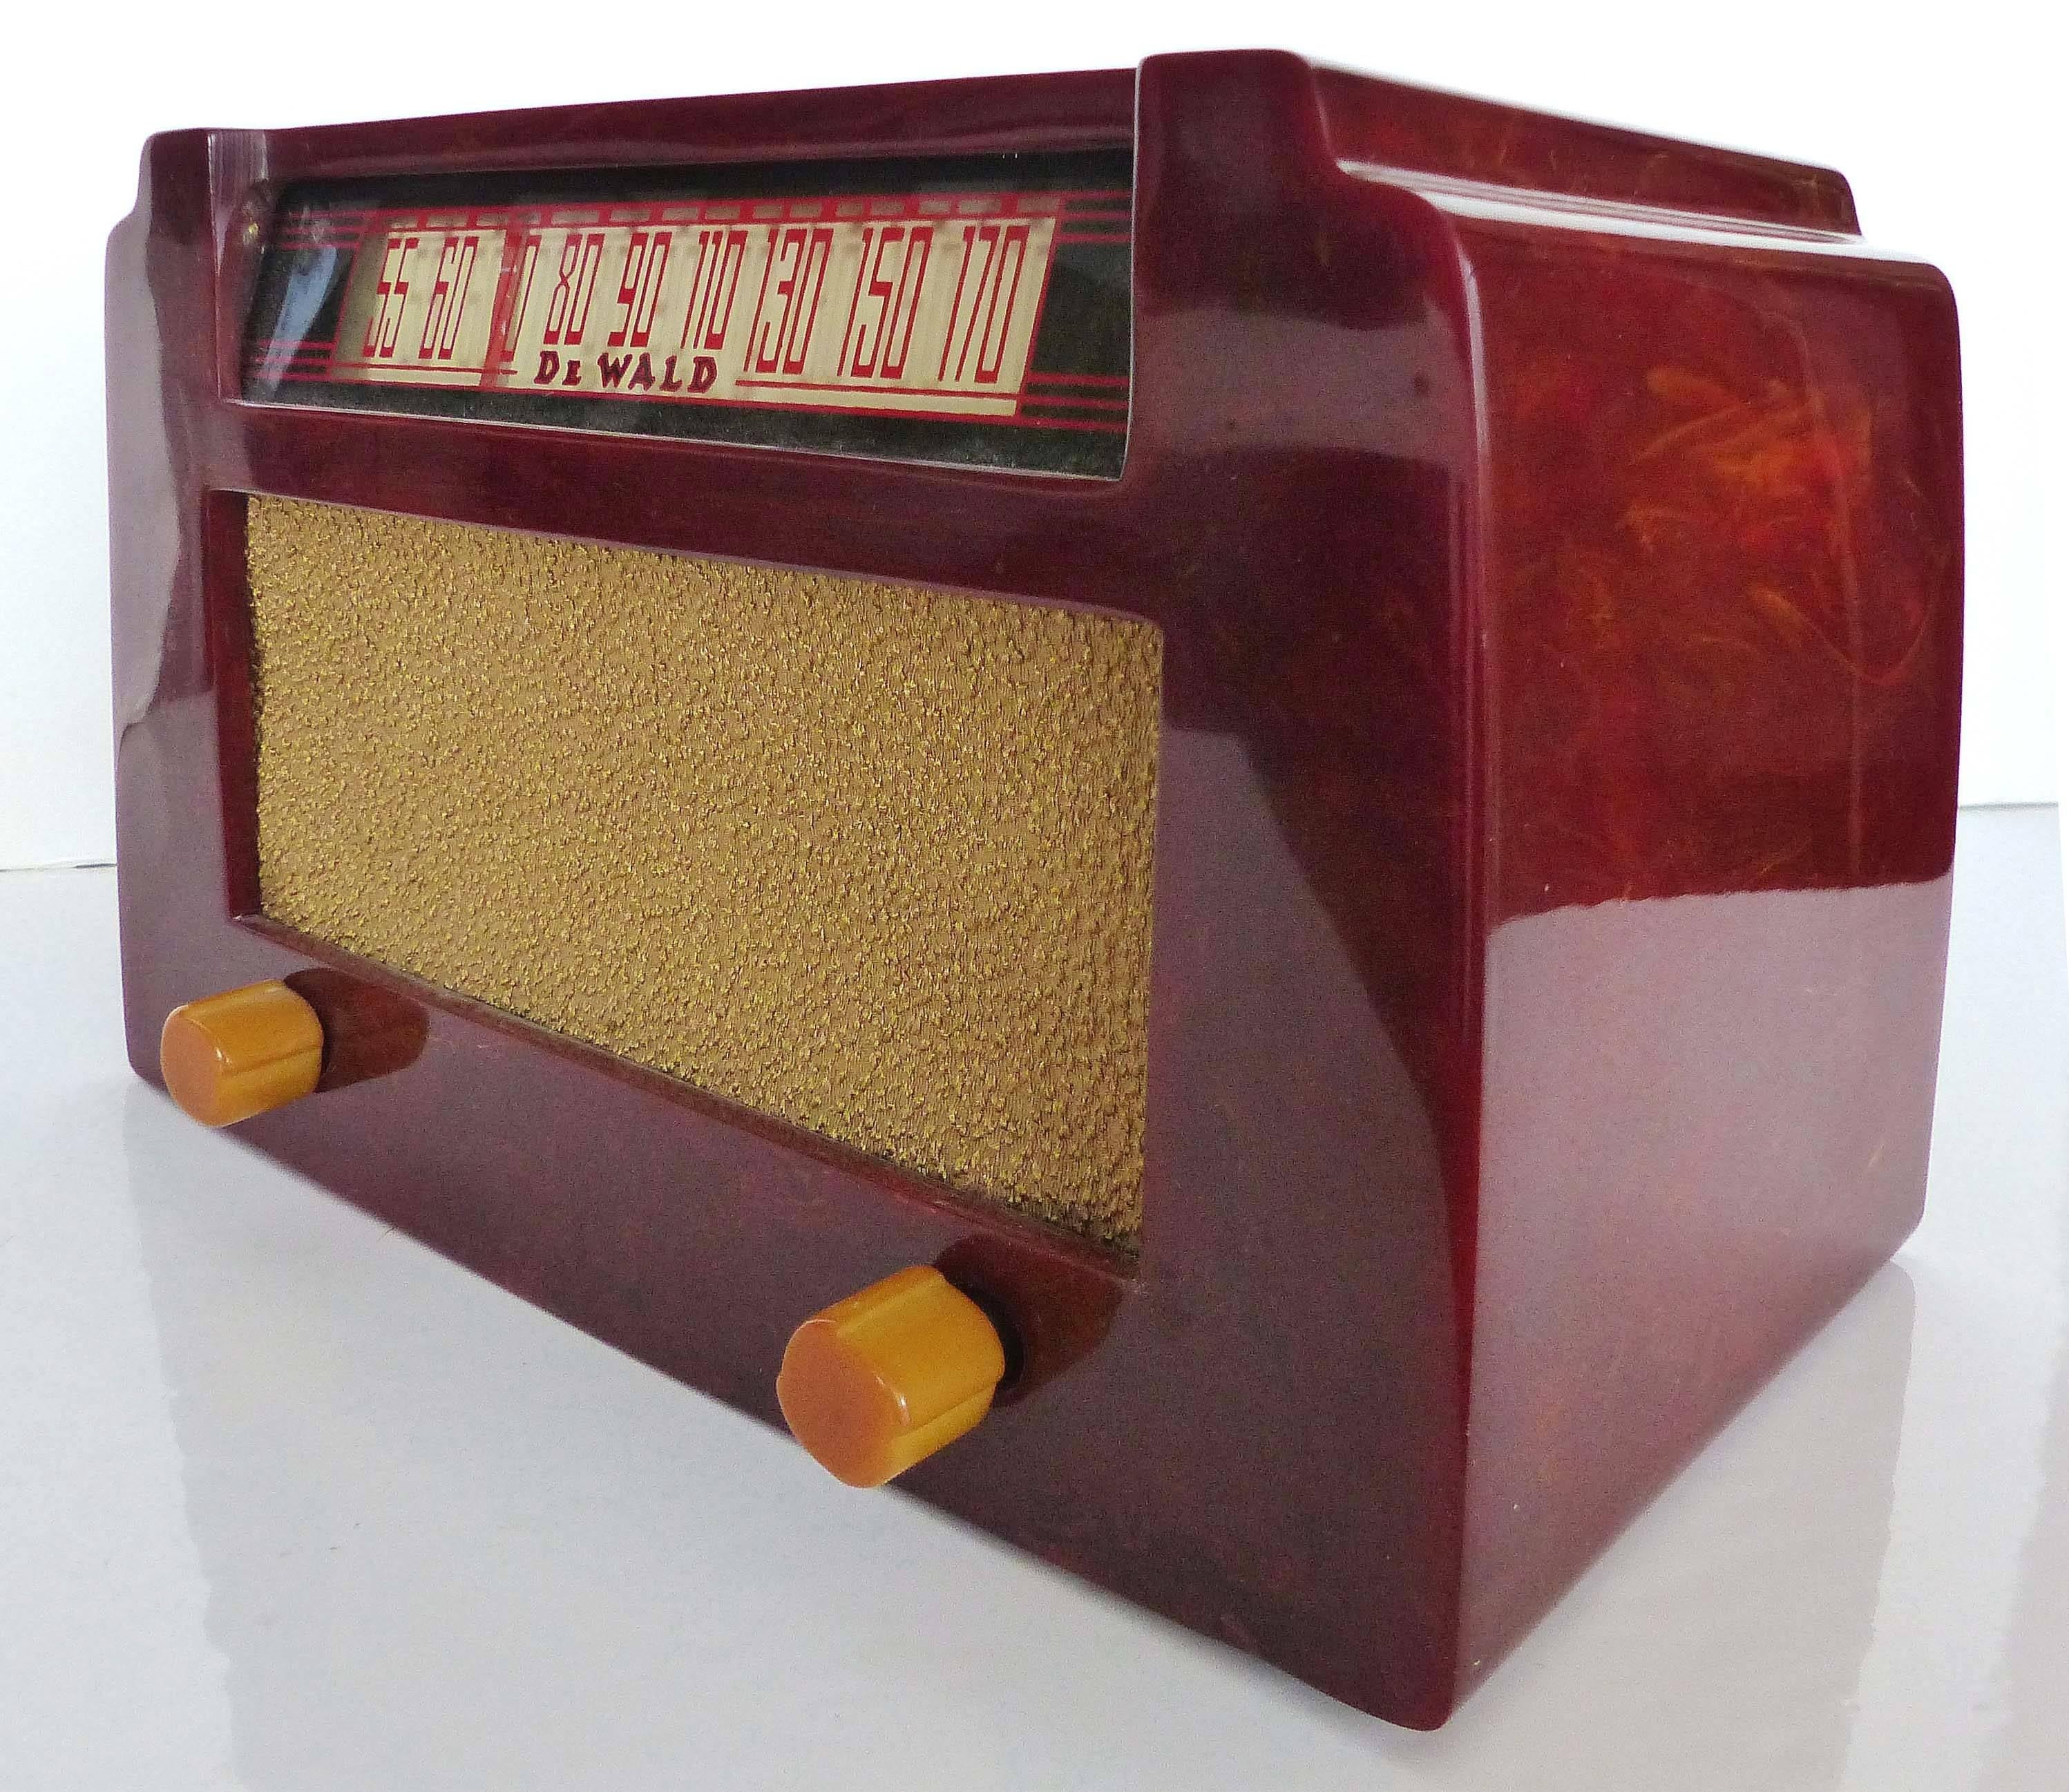 This clean American Art Deco Catalin A-502 radio known to collectors as the step top was made by DeWald Radio Manufacturing, Long Island, New York, circa 1946. The radio, in red with swirls and yellow knobs, is in excellent condition save for a